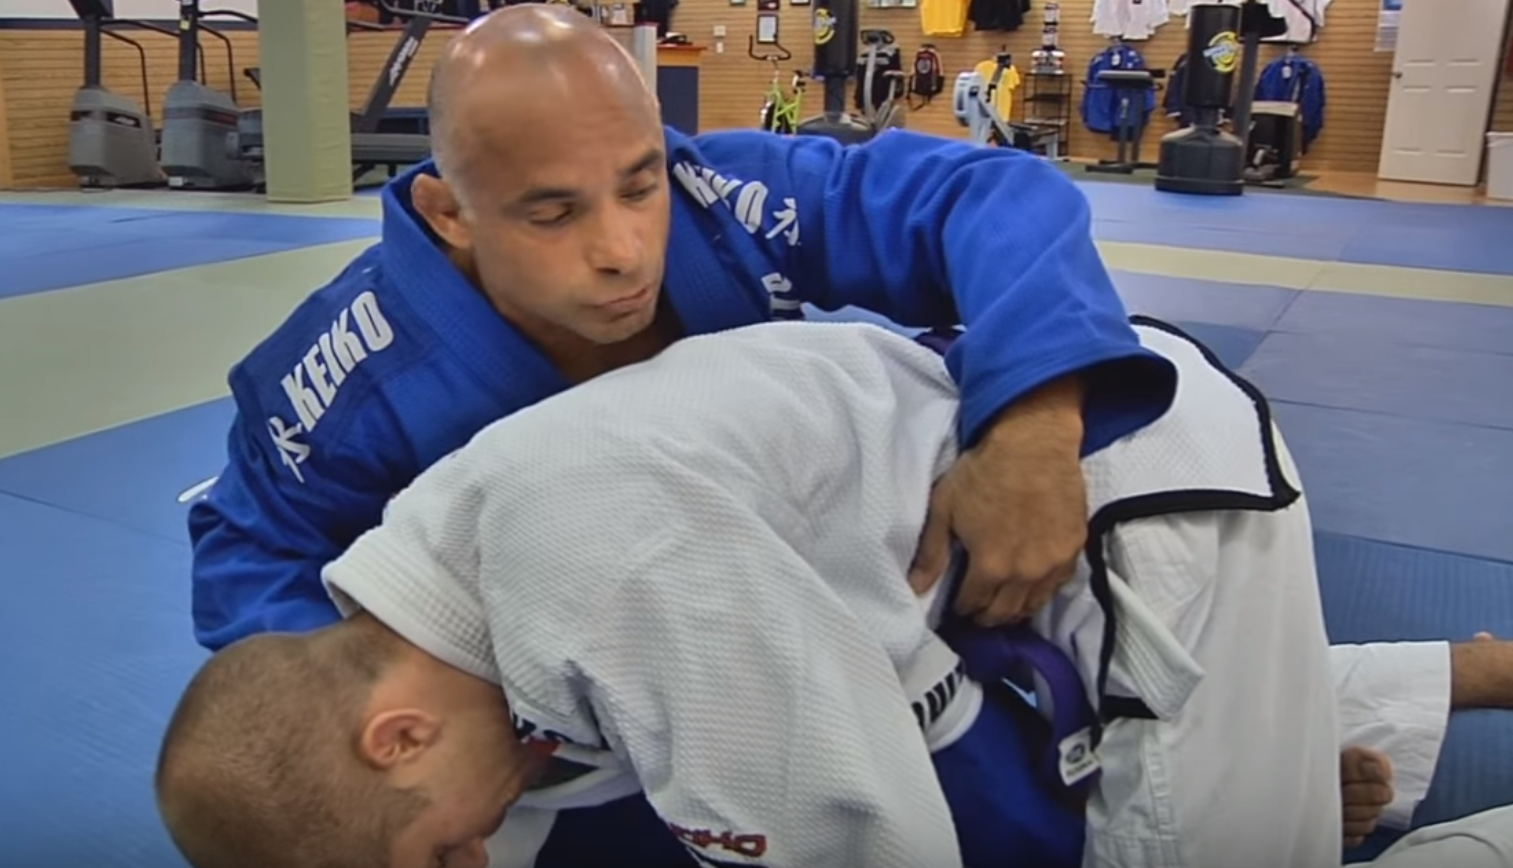 Arm_drag_from_closed_guard_position